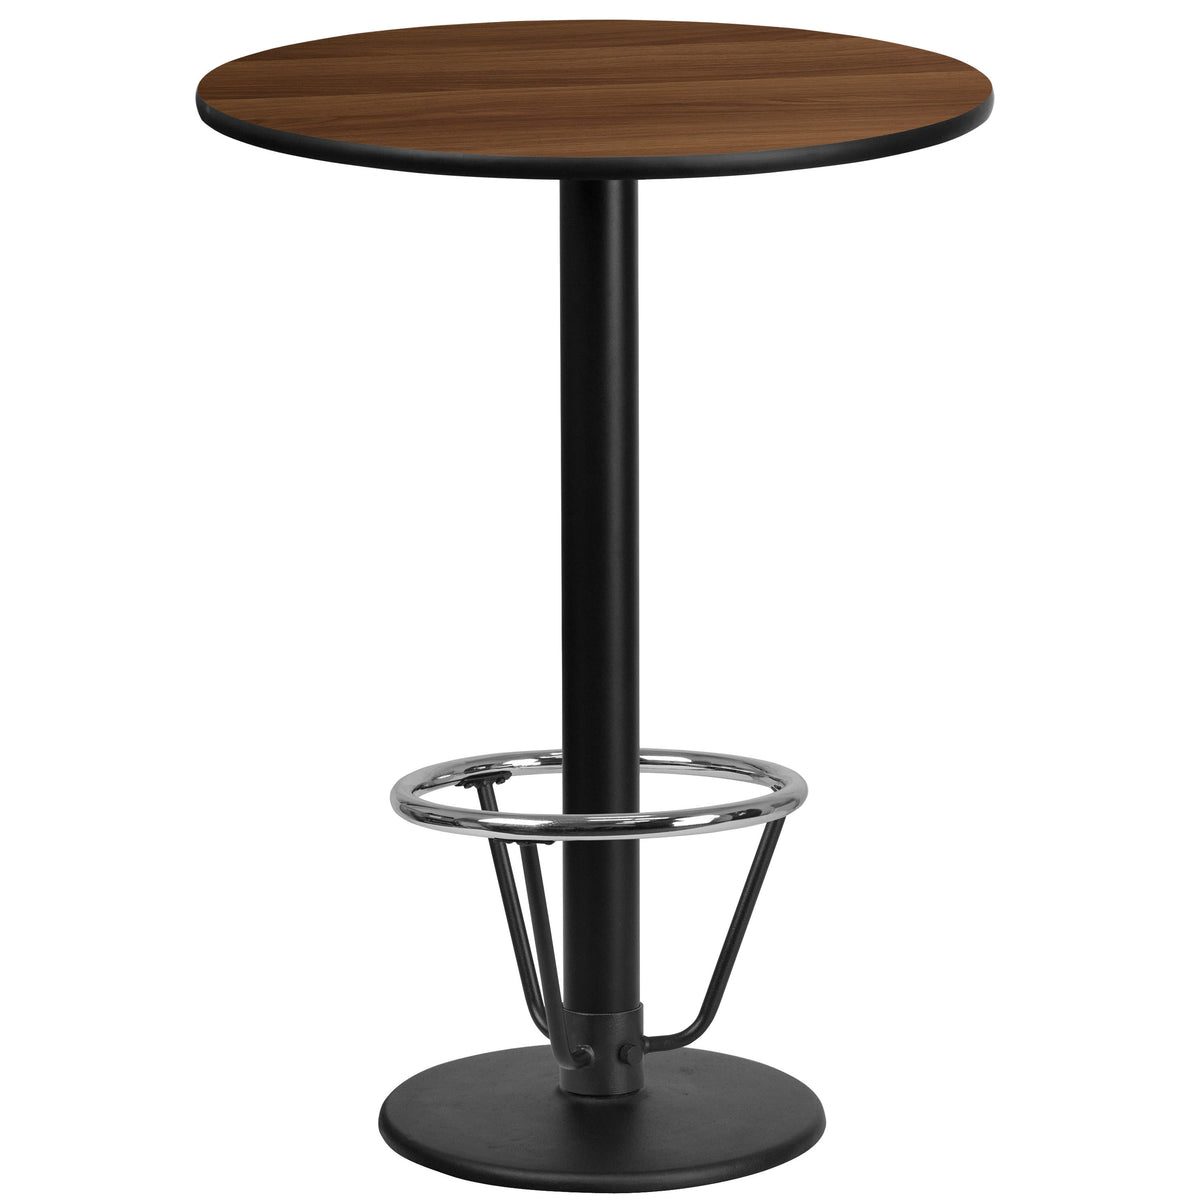 Walnut |#| 24inch Round Walnut Laminate Table Top & 18inch Round Bar Height Base with Foot Ring